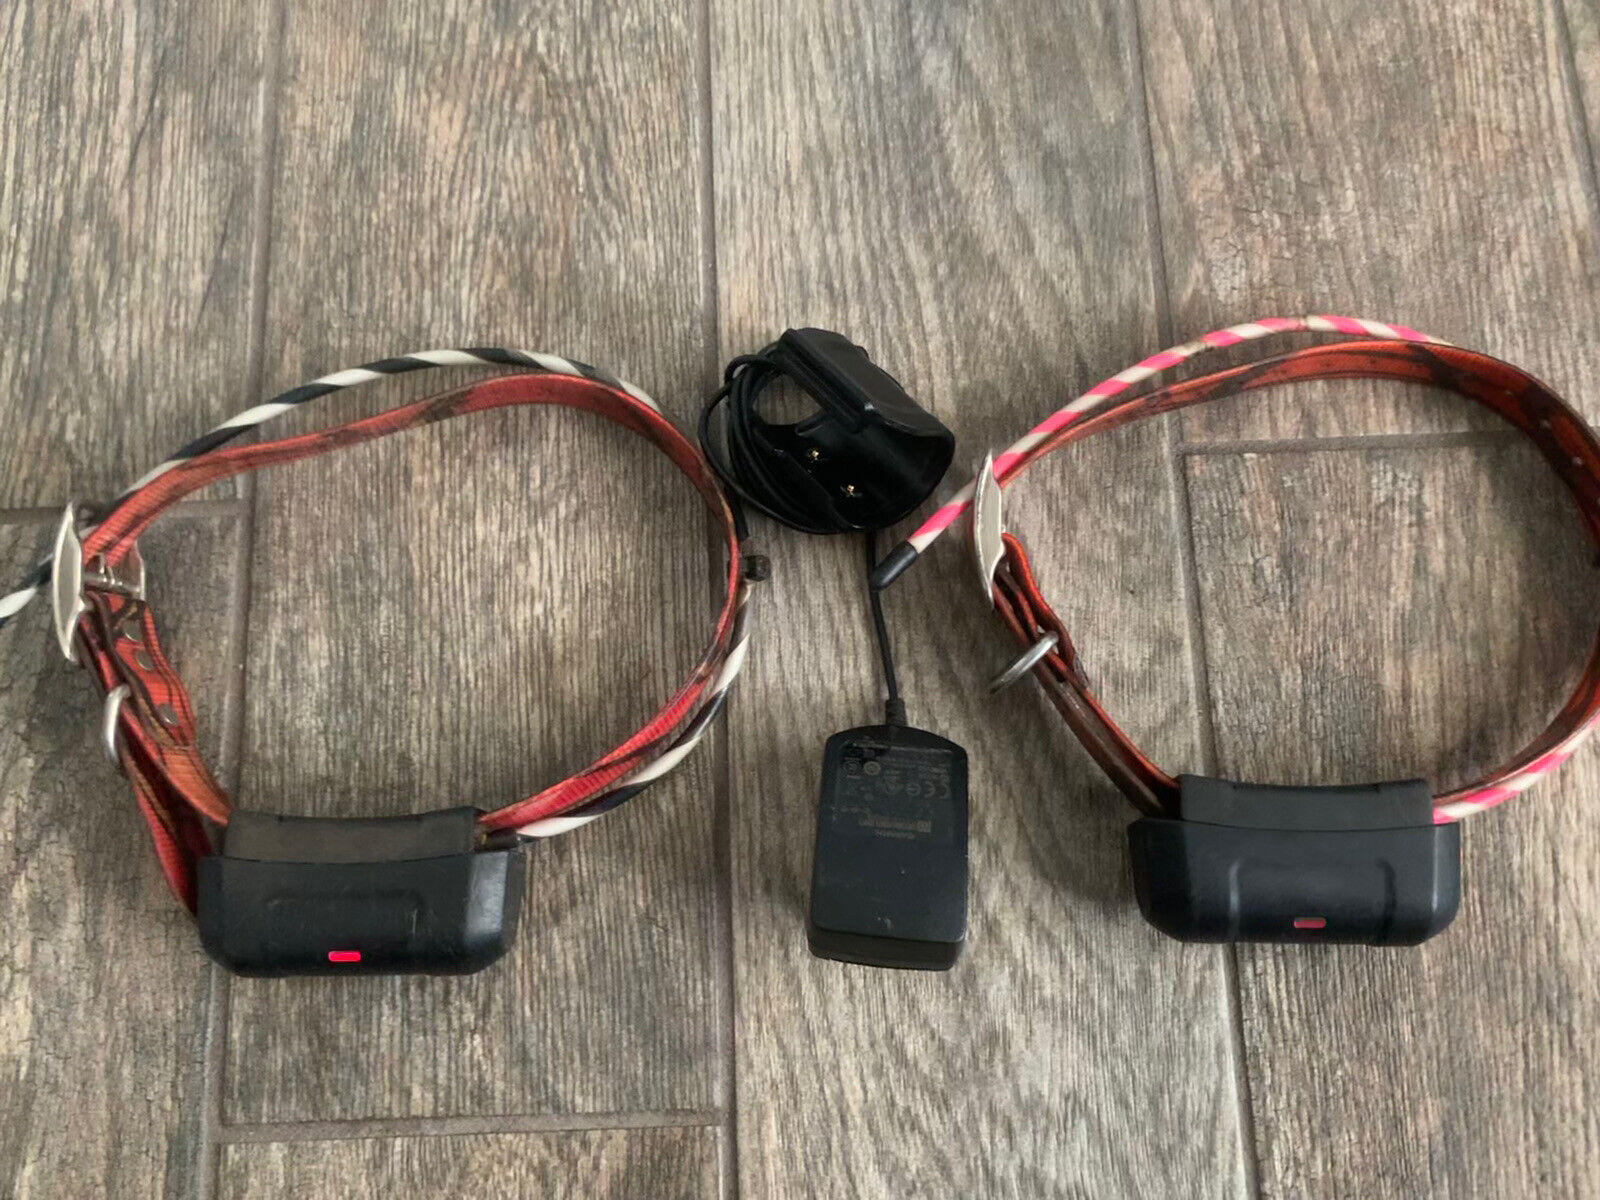 Two Garmin DC40 Collars Dog Tracking For Astro 320 + 220 - Check It Out!